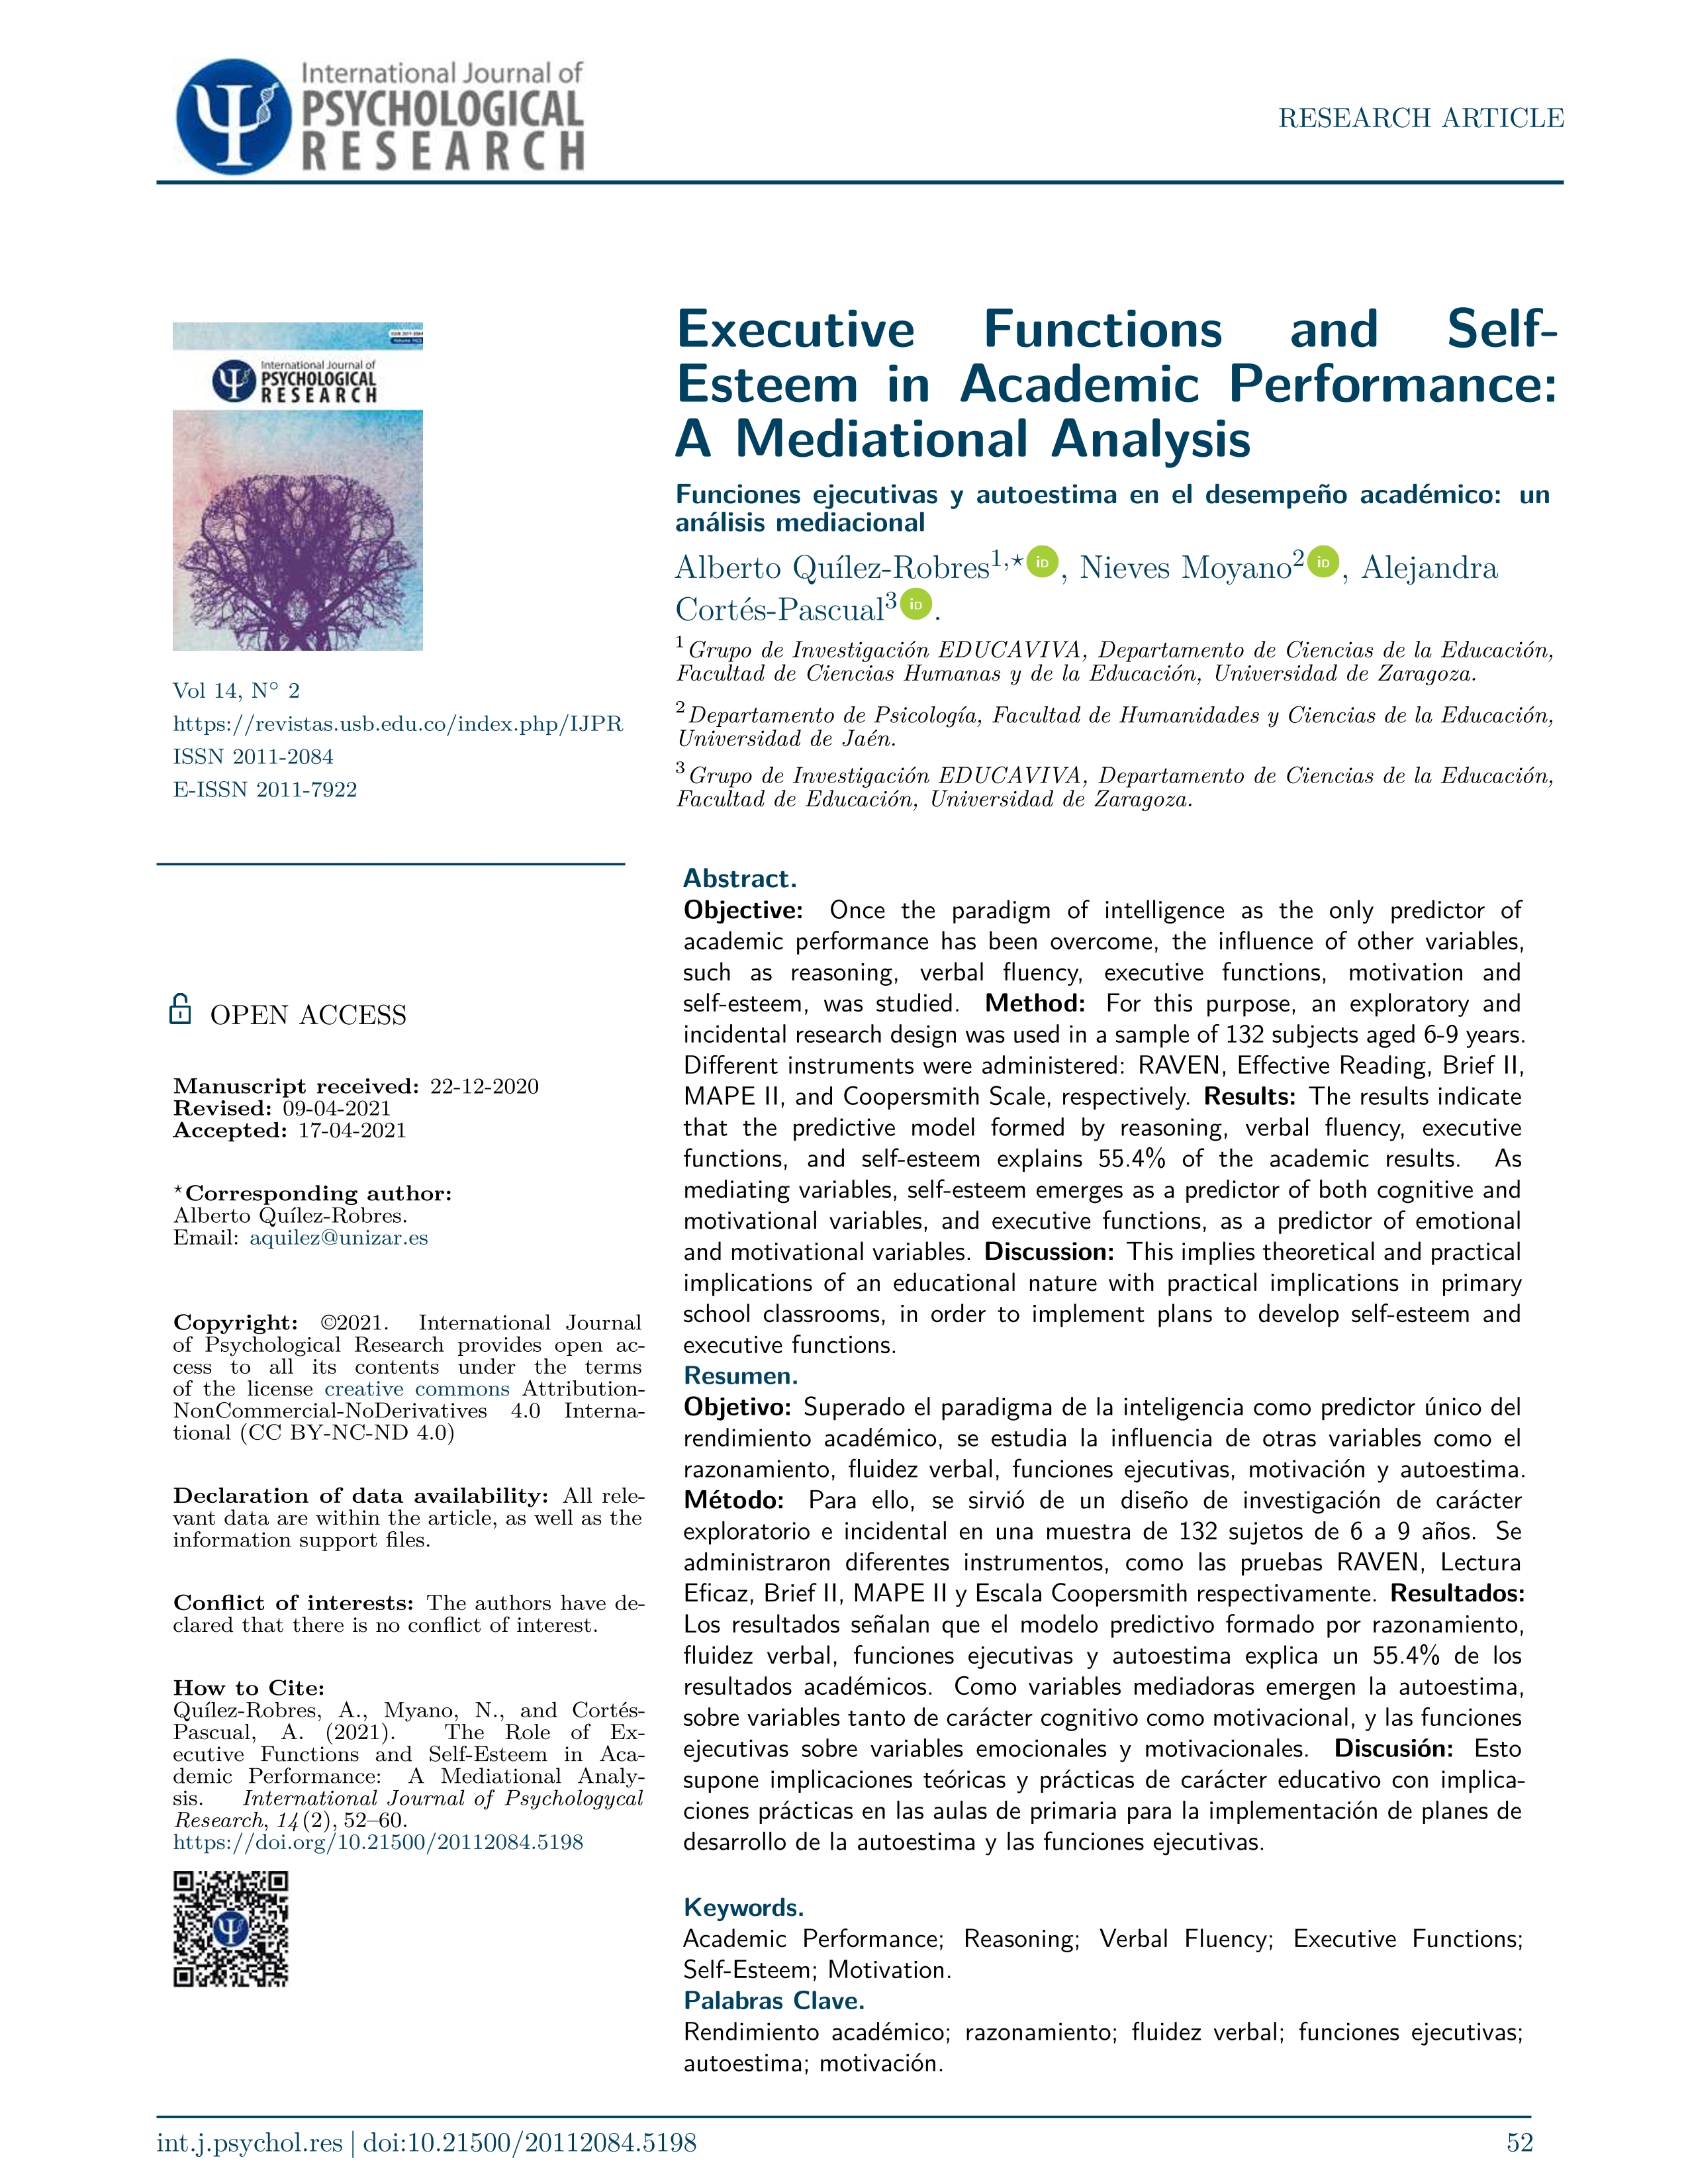 Executive Functions and Self- Esteem in Academic Performance: A Mediational Analysis